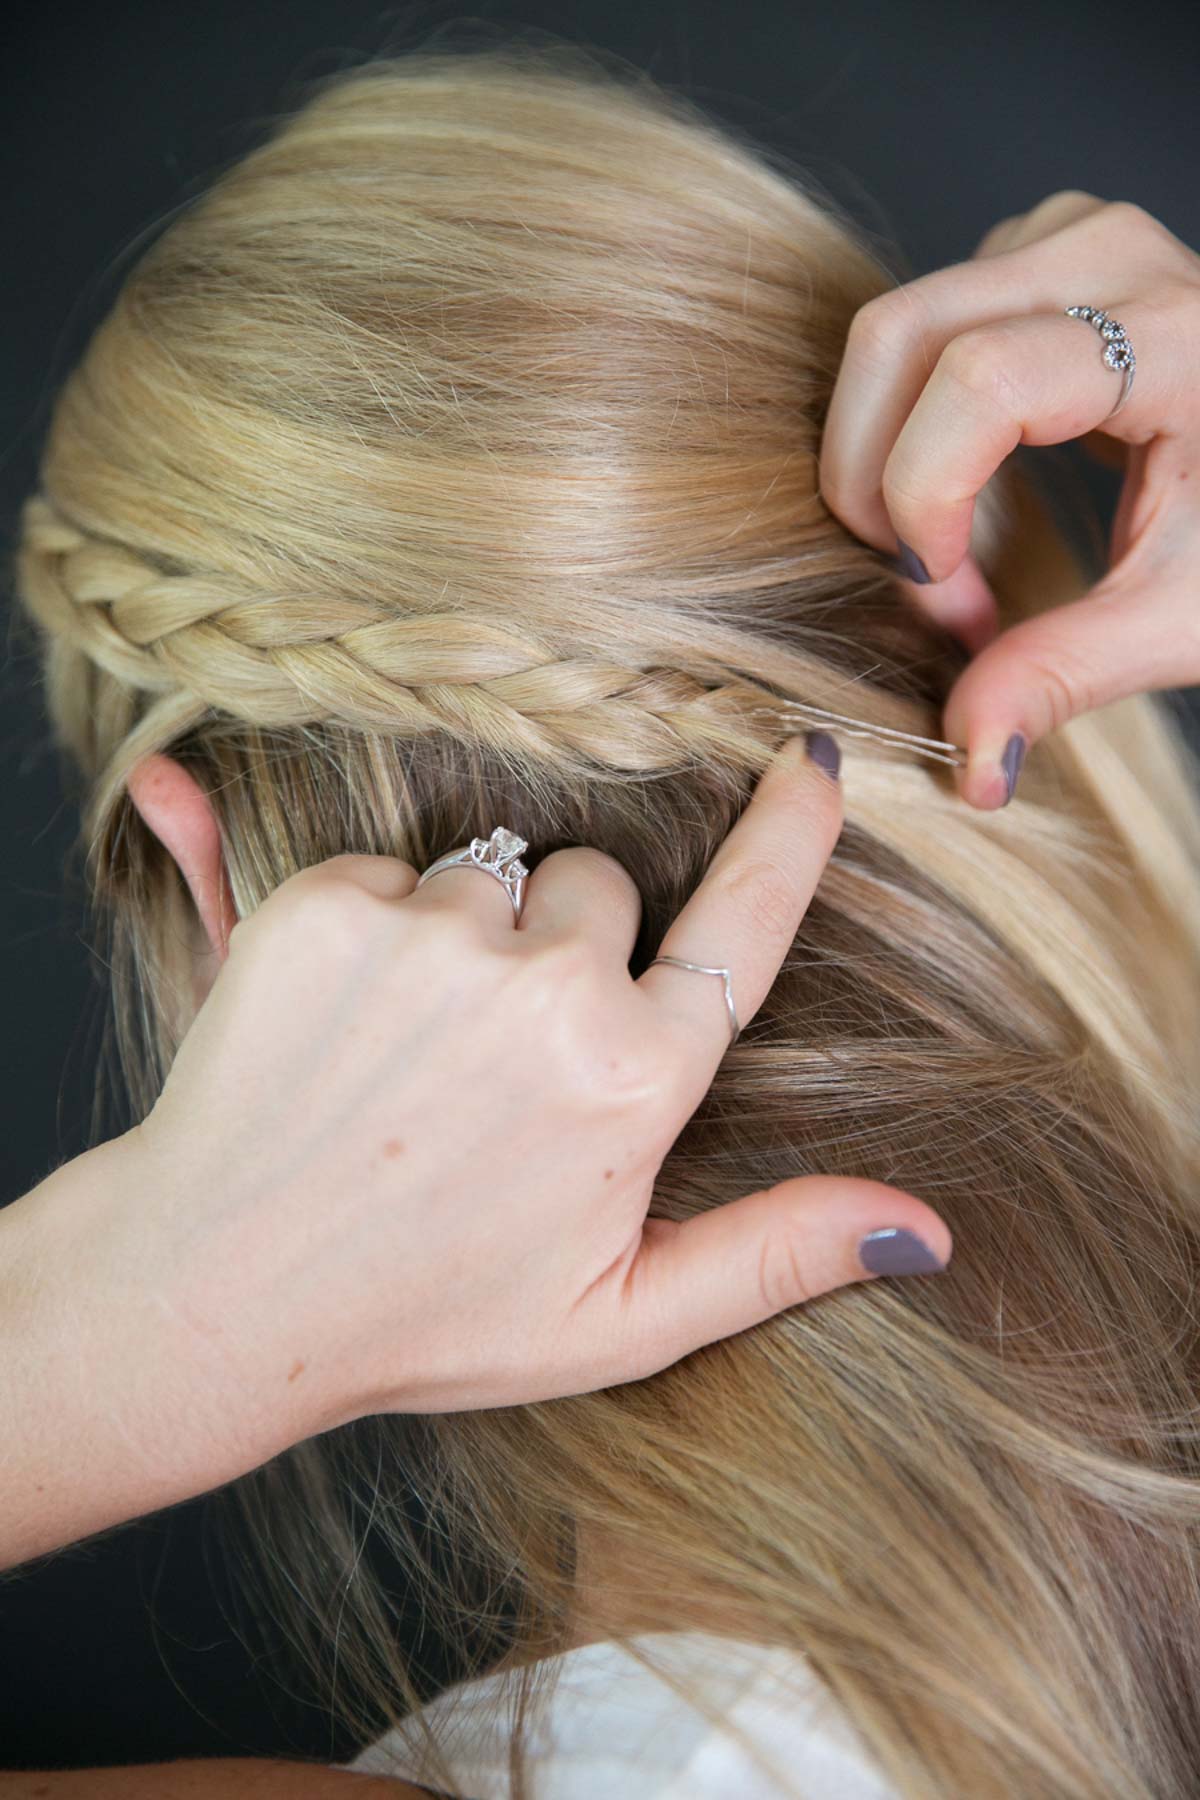 How To Braid Your Own Hair: Tutorials For 8 Types Of Braids